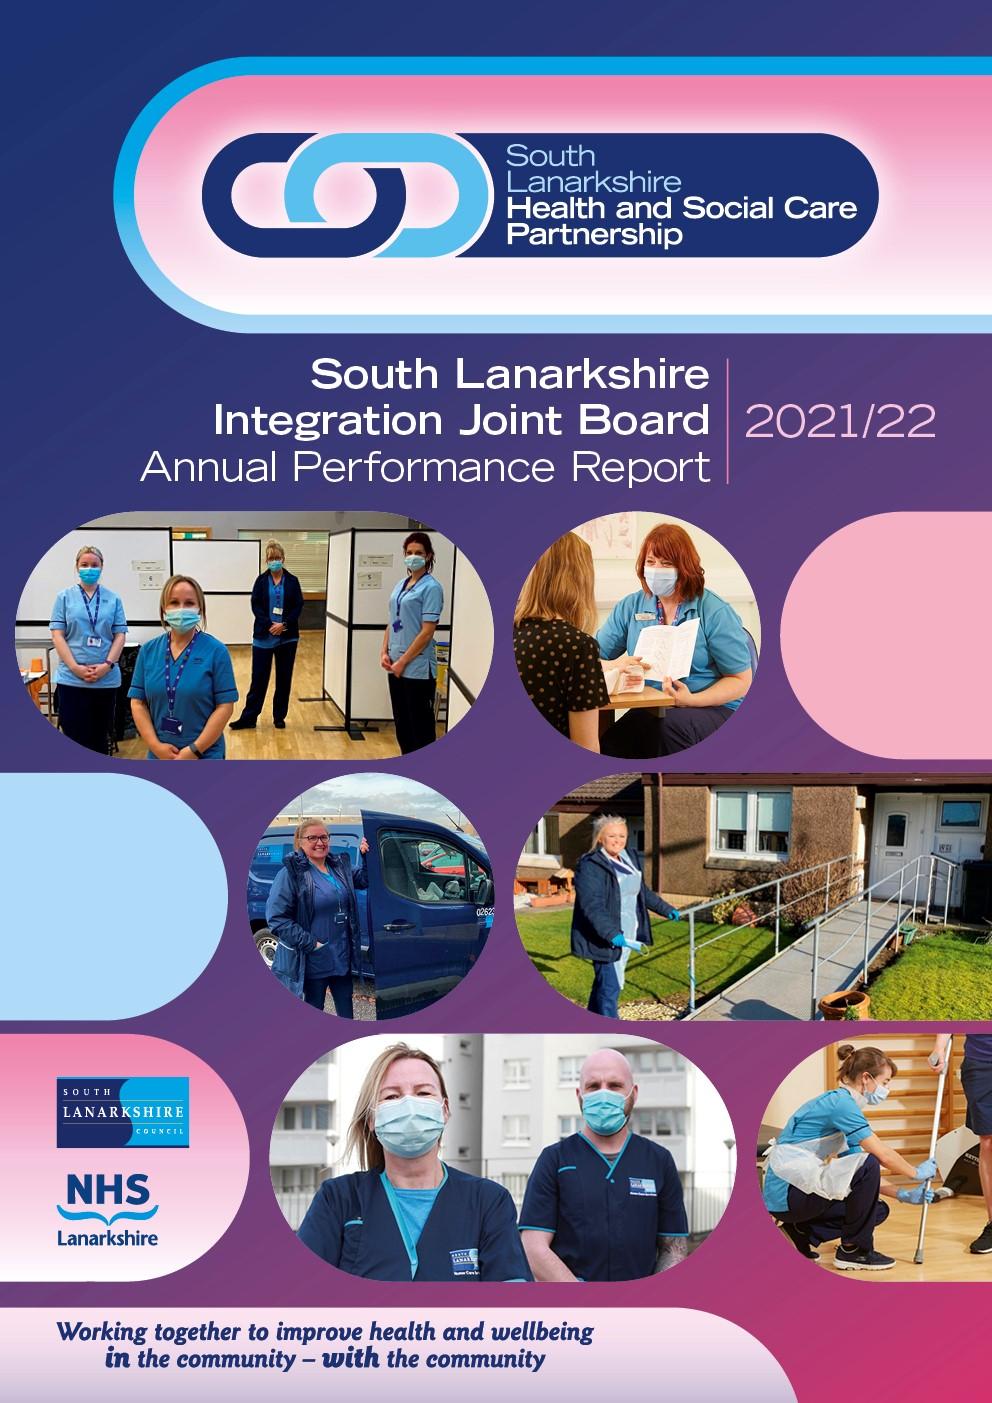 Drawing strength from the recent past: South Lanarkshire IJB publish Annual Performance Report  